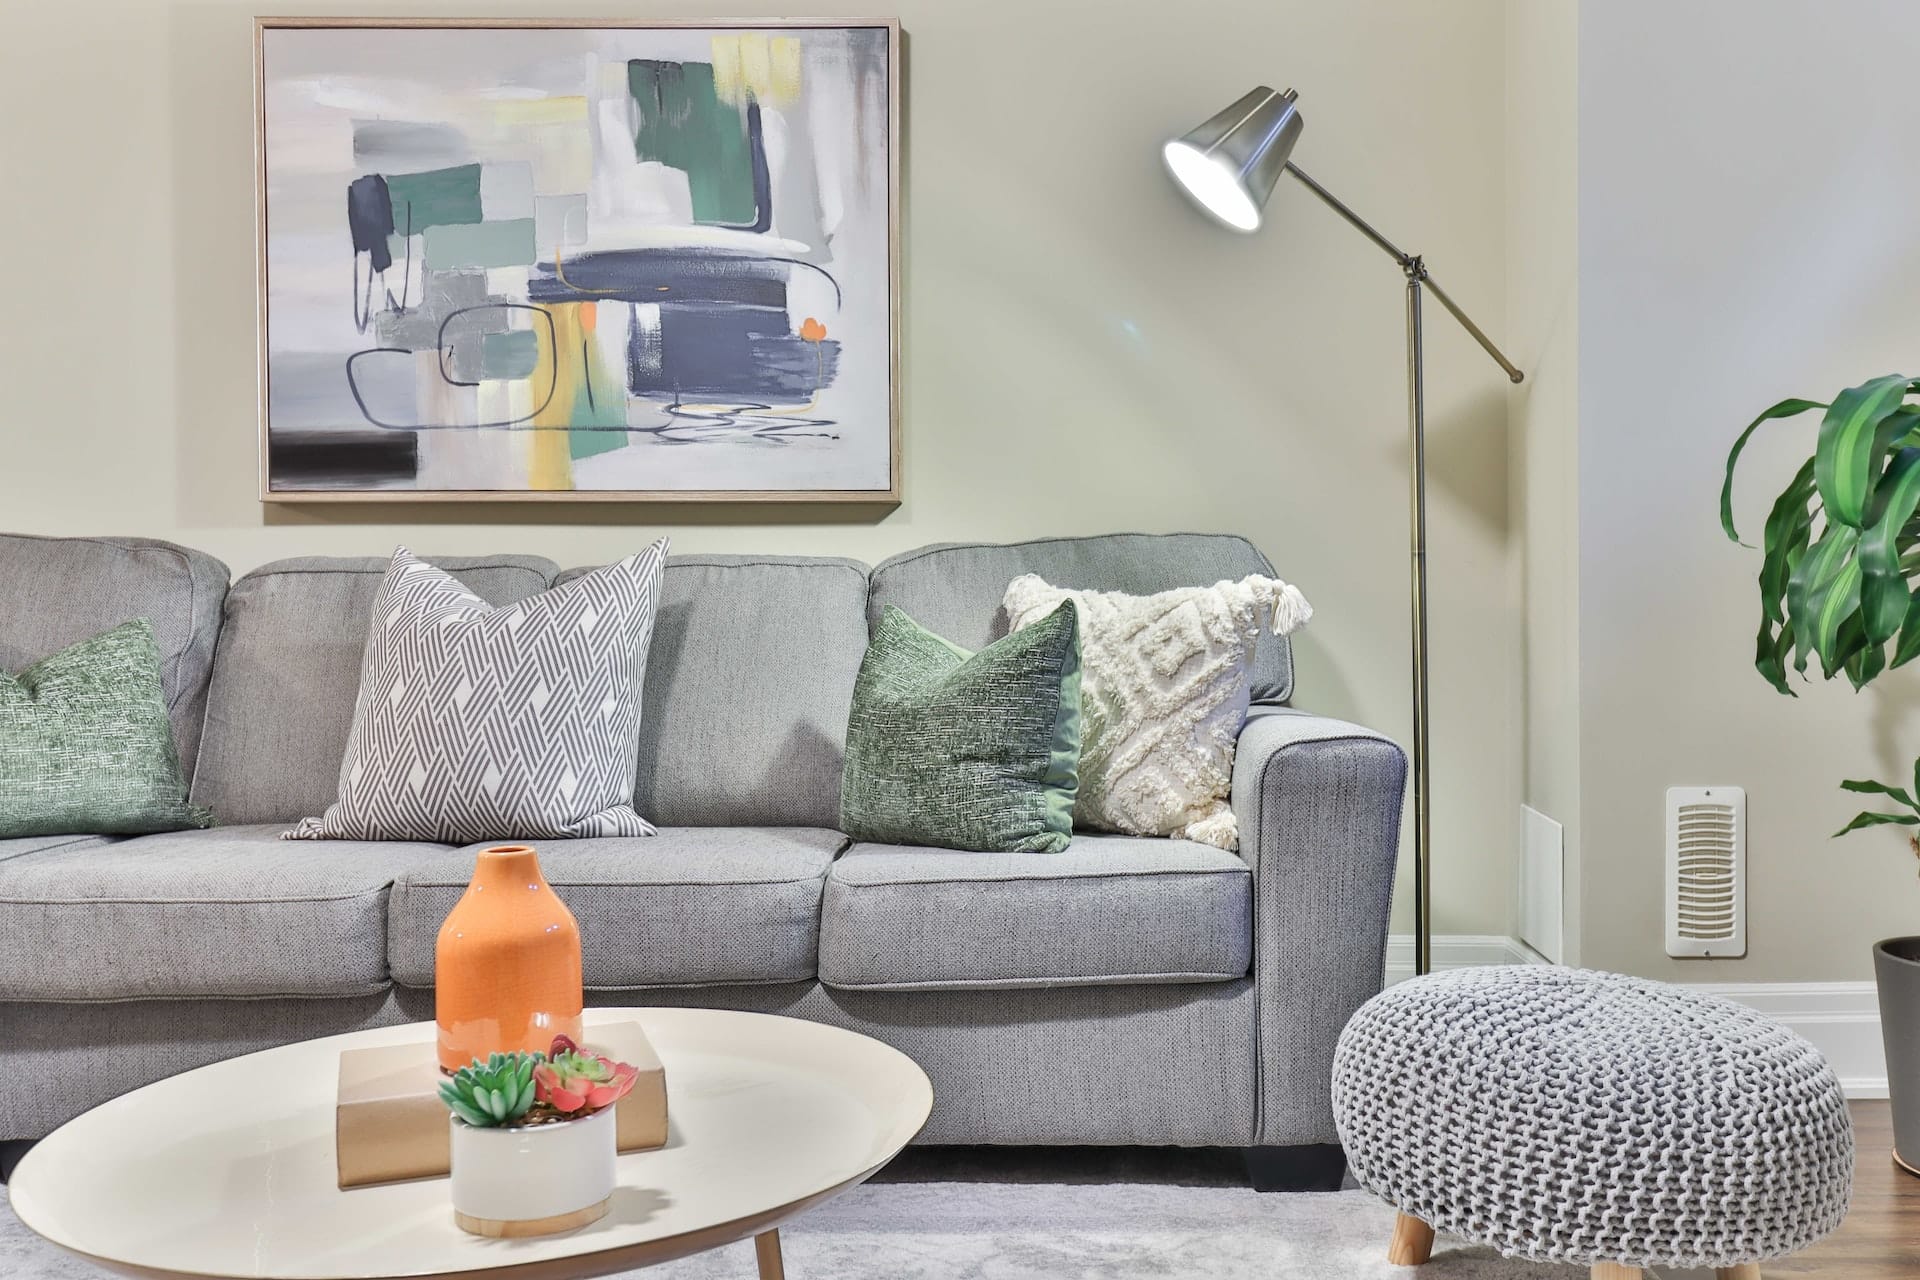 7 Ways to Update Your Living Room with New Furniture